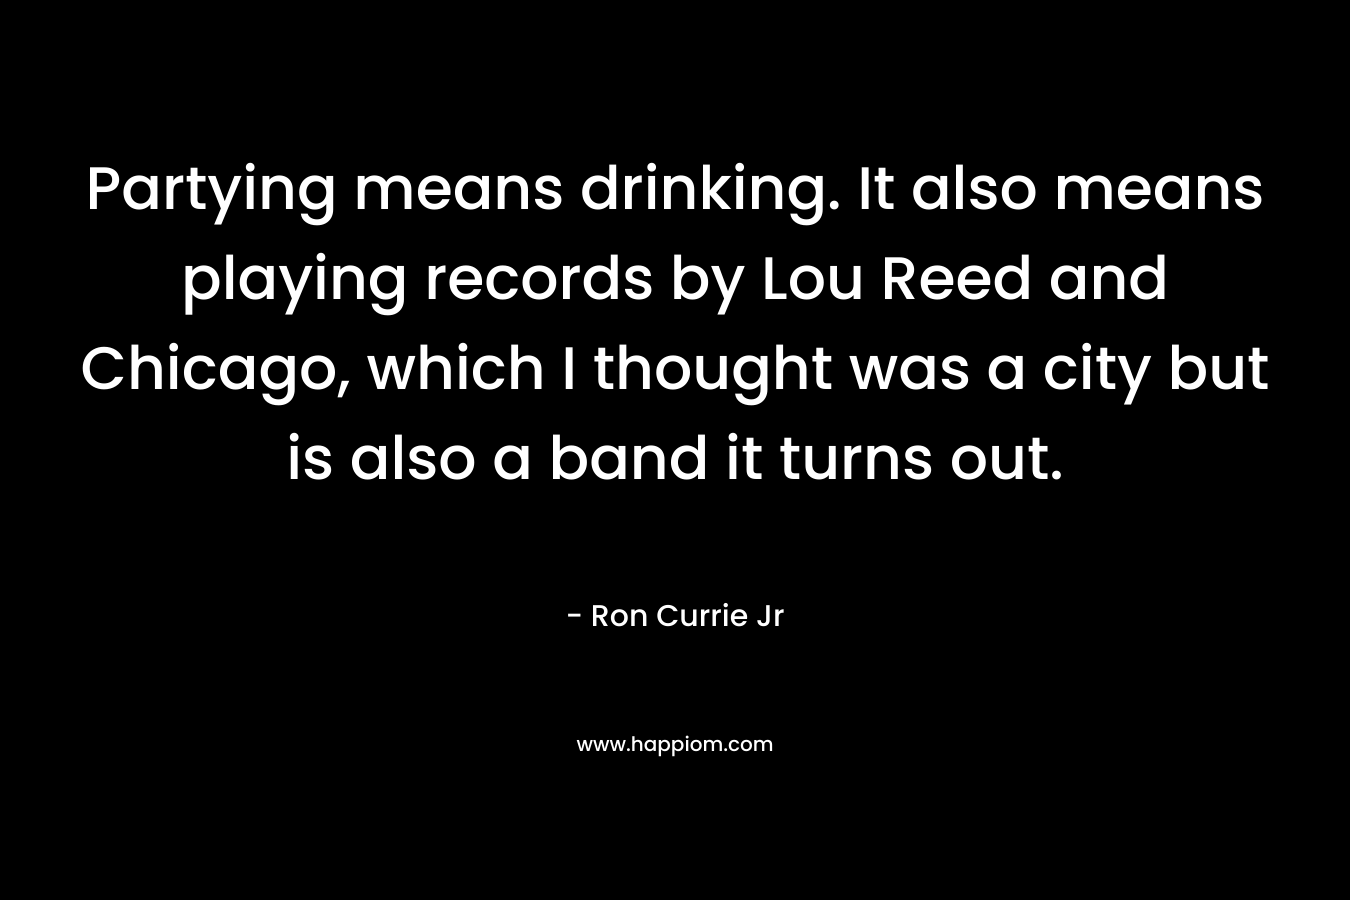 Partying means drinking. It also means playing records by Lou Reed and Chicago, which I thought was a city but is also a band it turns out. – Ron Currie Jr